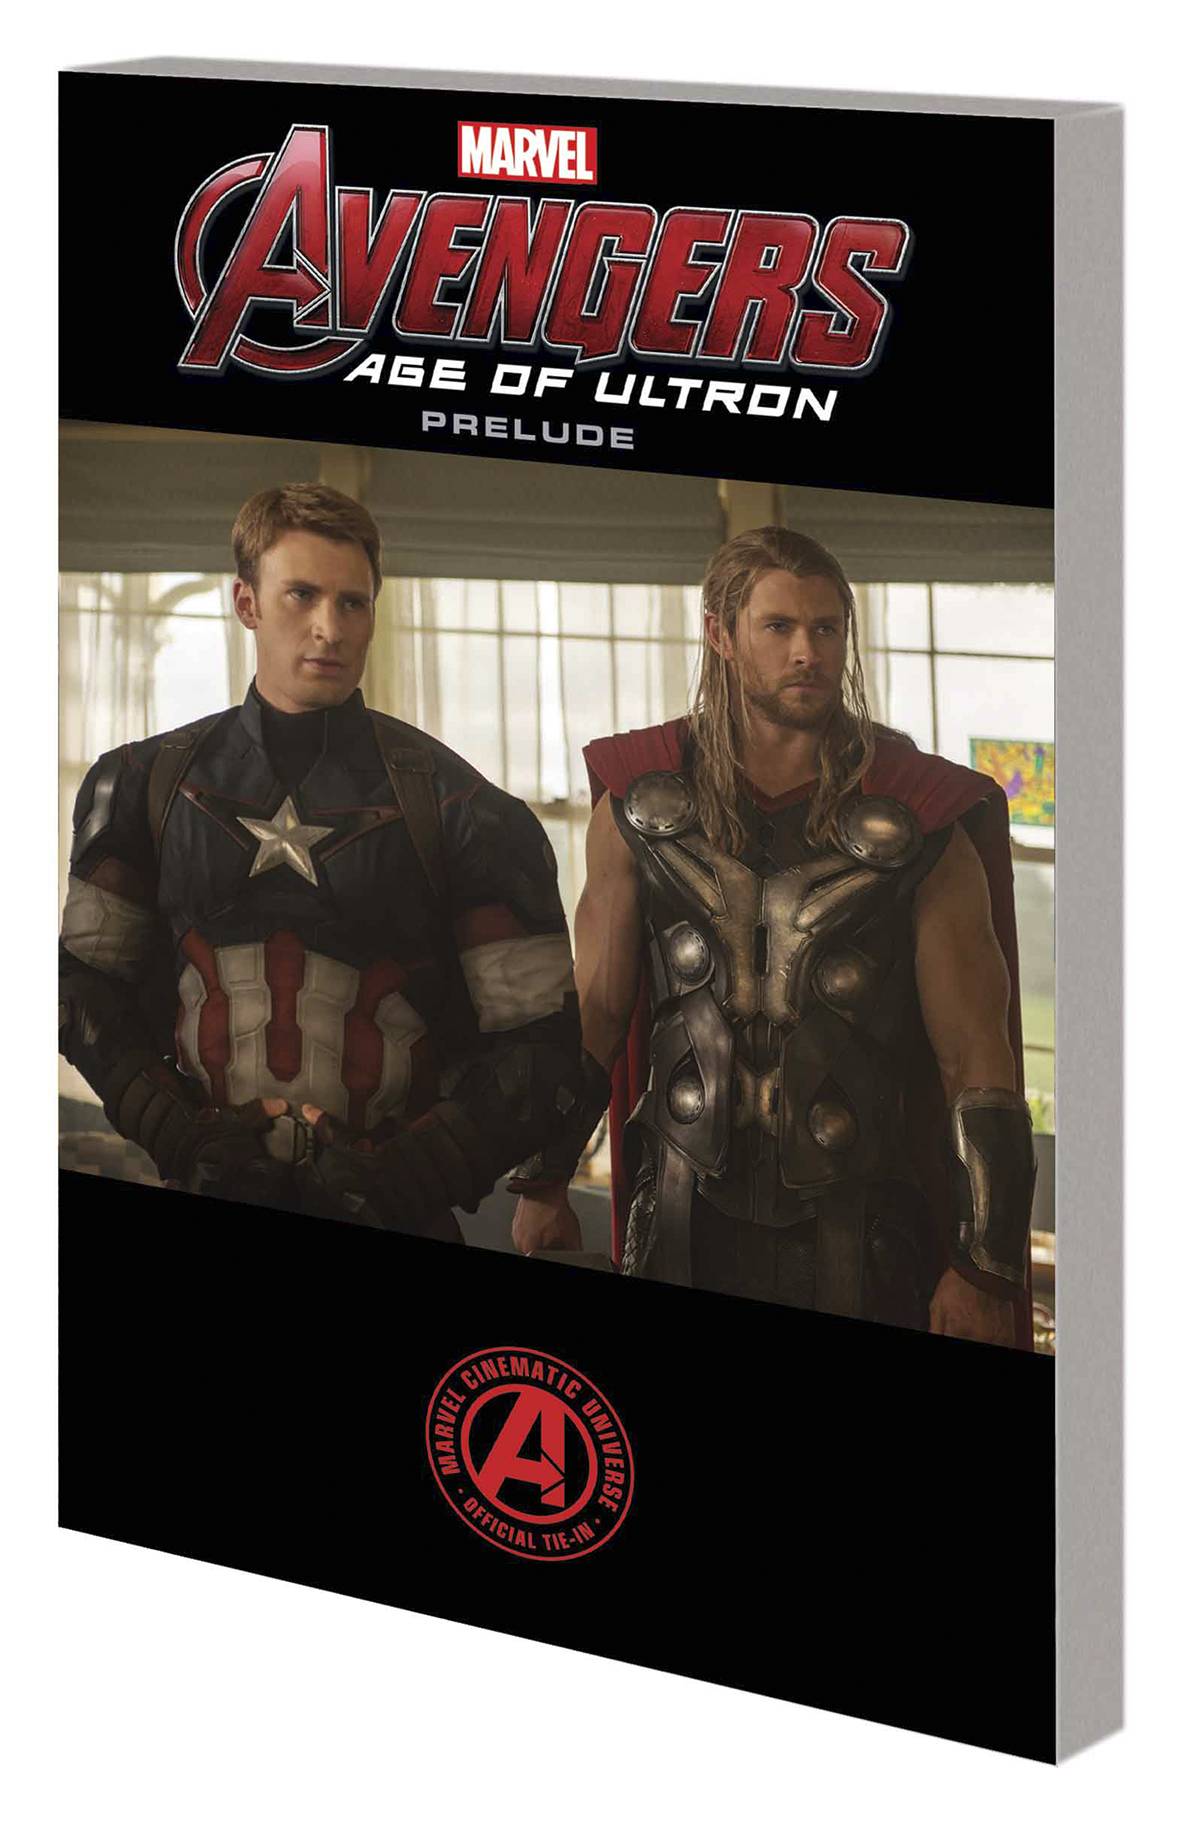 Marvels Avengers Graphic Novel Age of Ultron Prelude